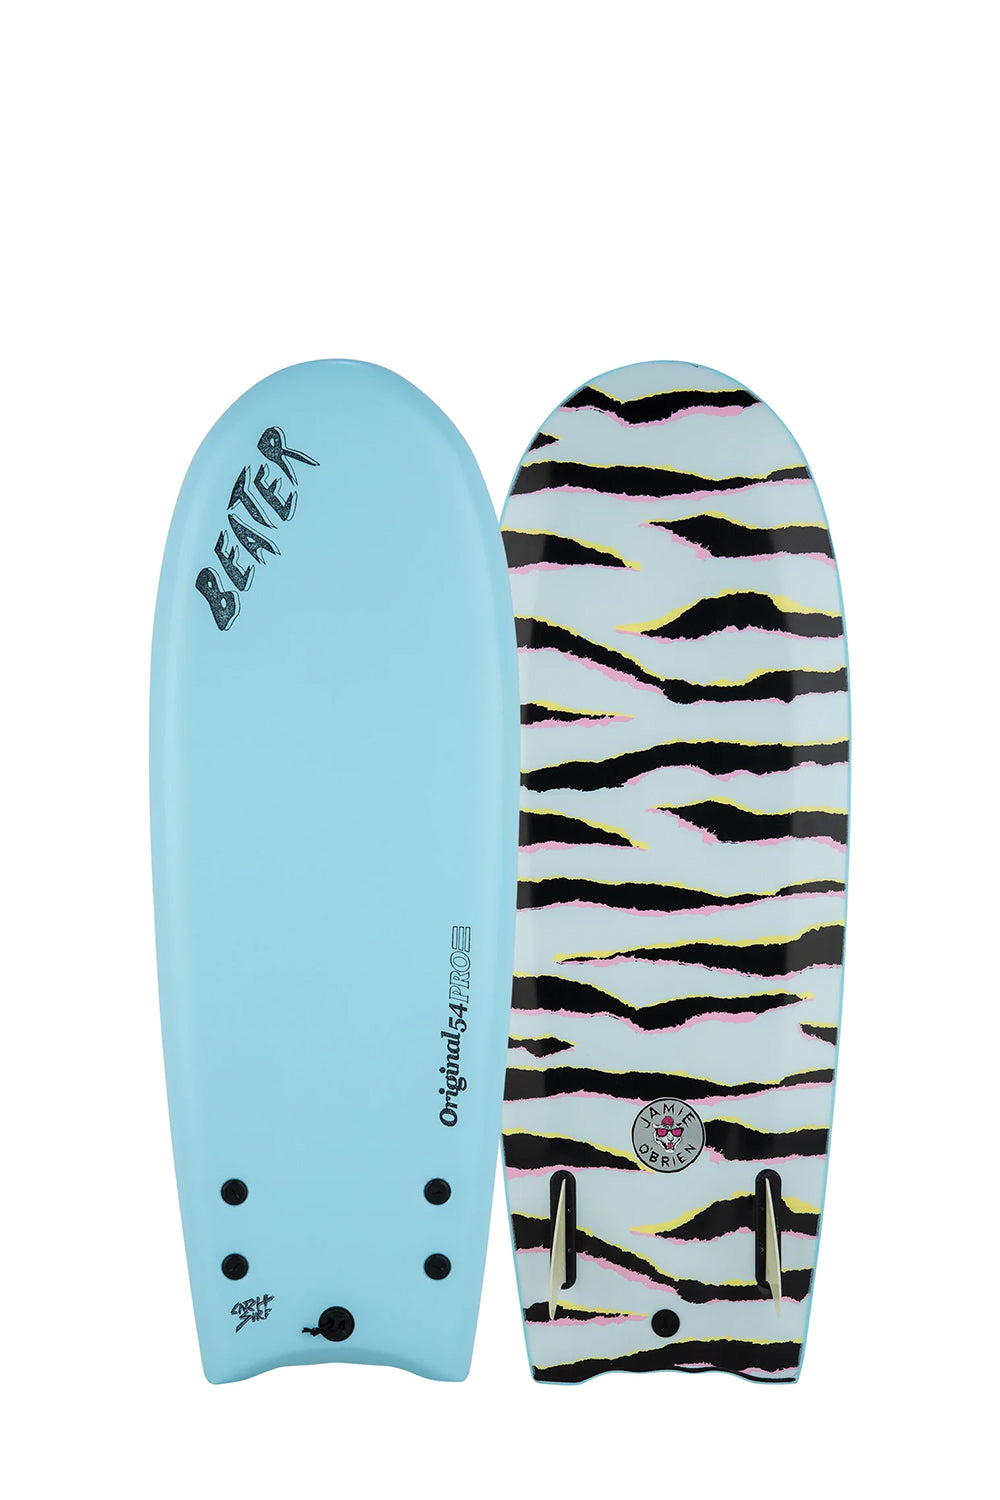 Catch Surf Beater Pro Twin 54" Softboard - Comes with fins